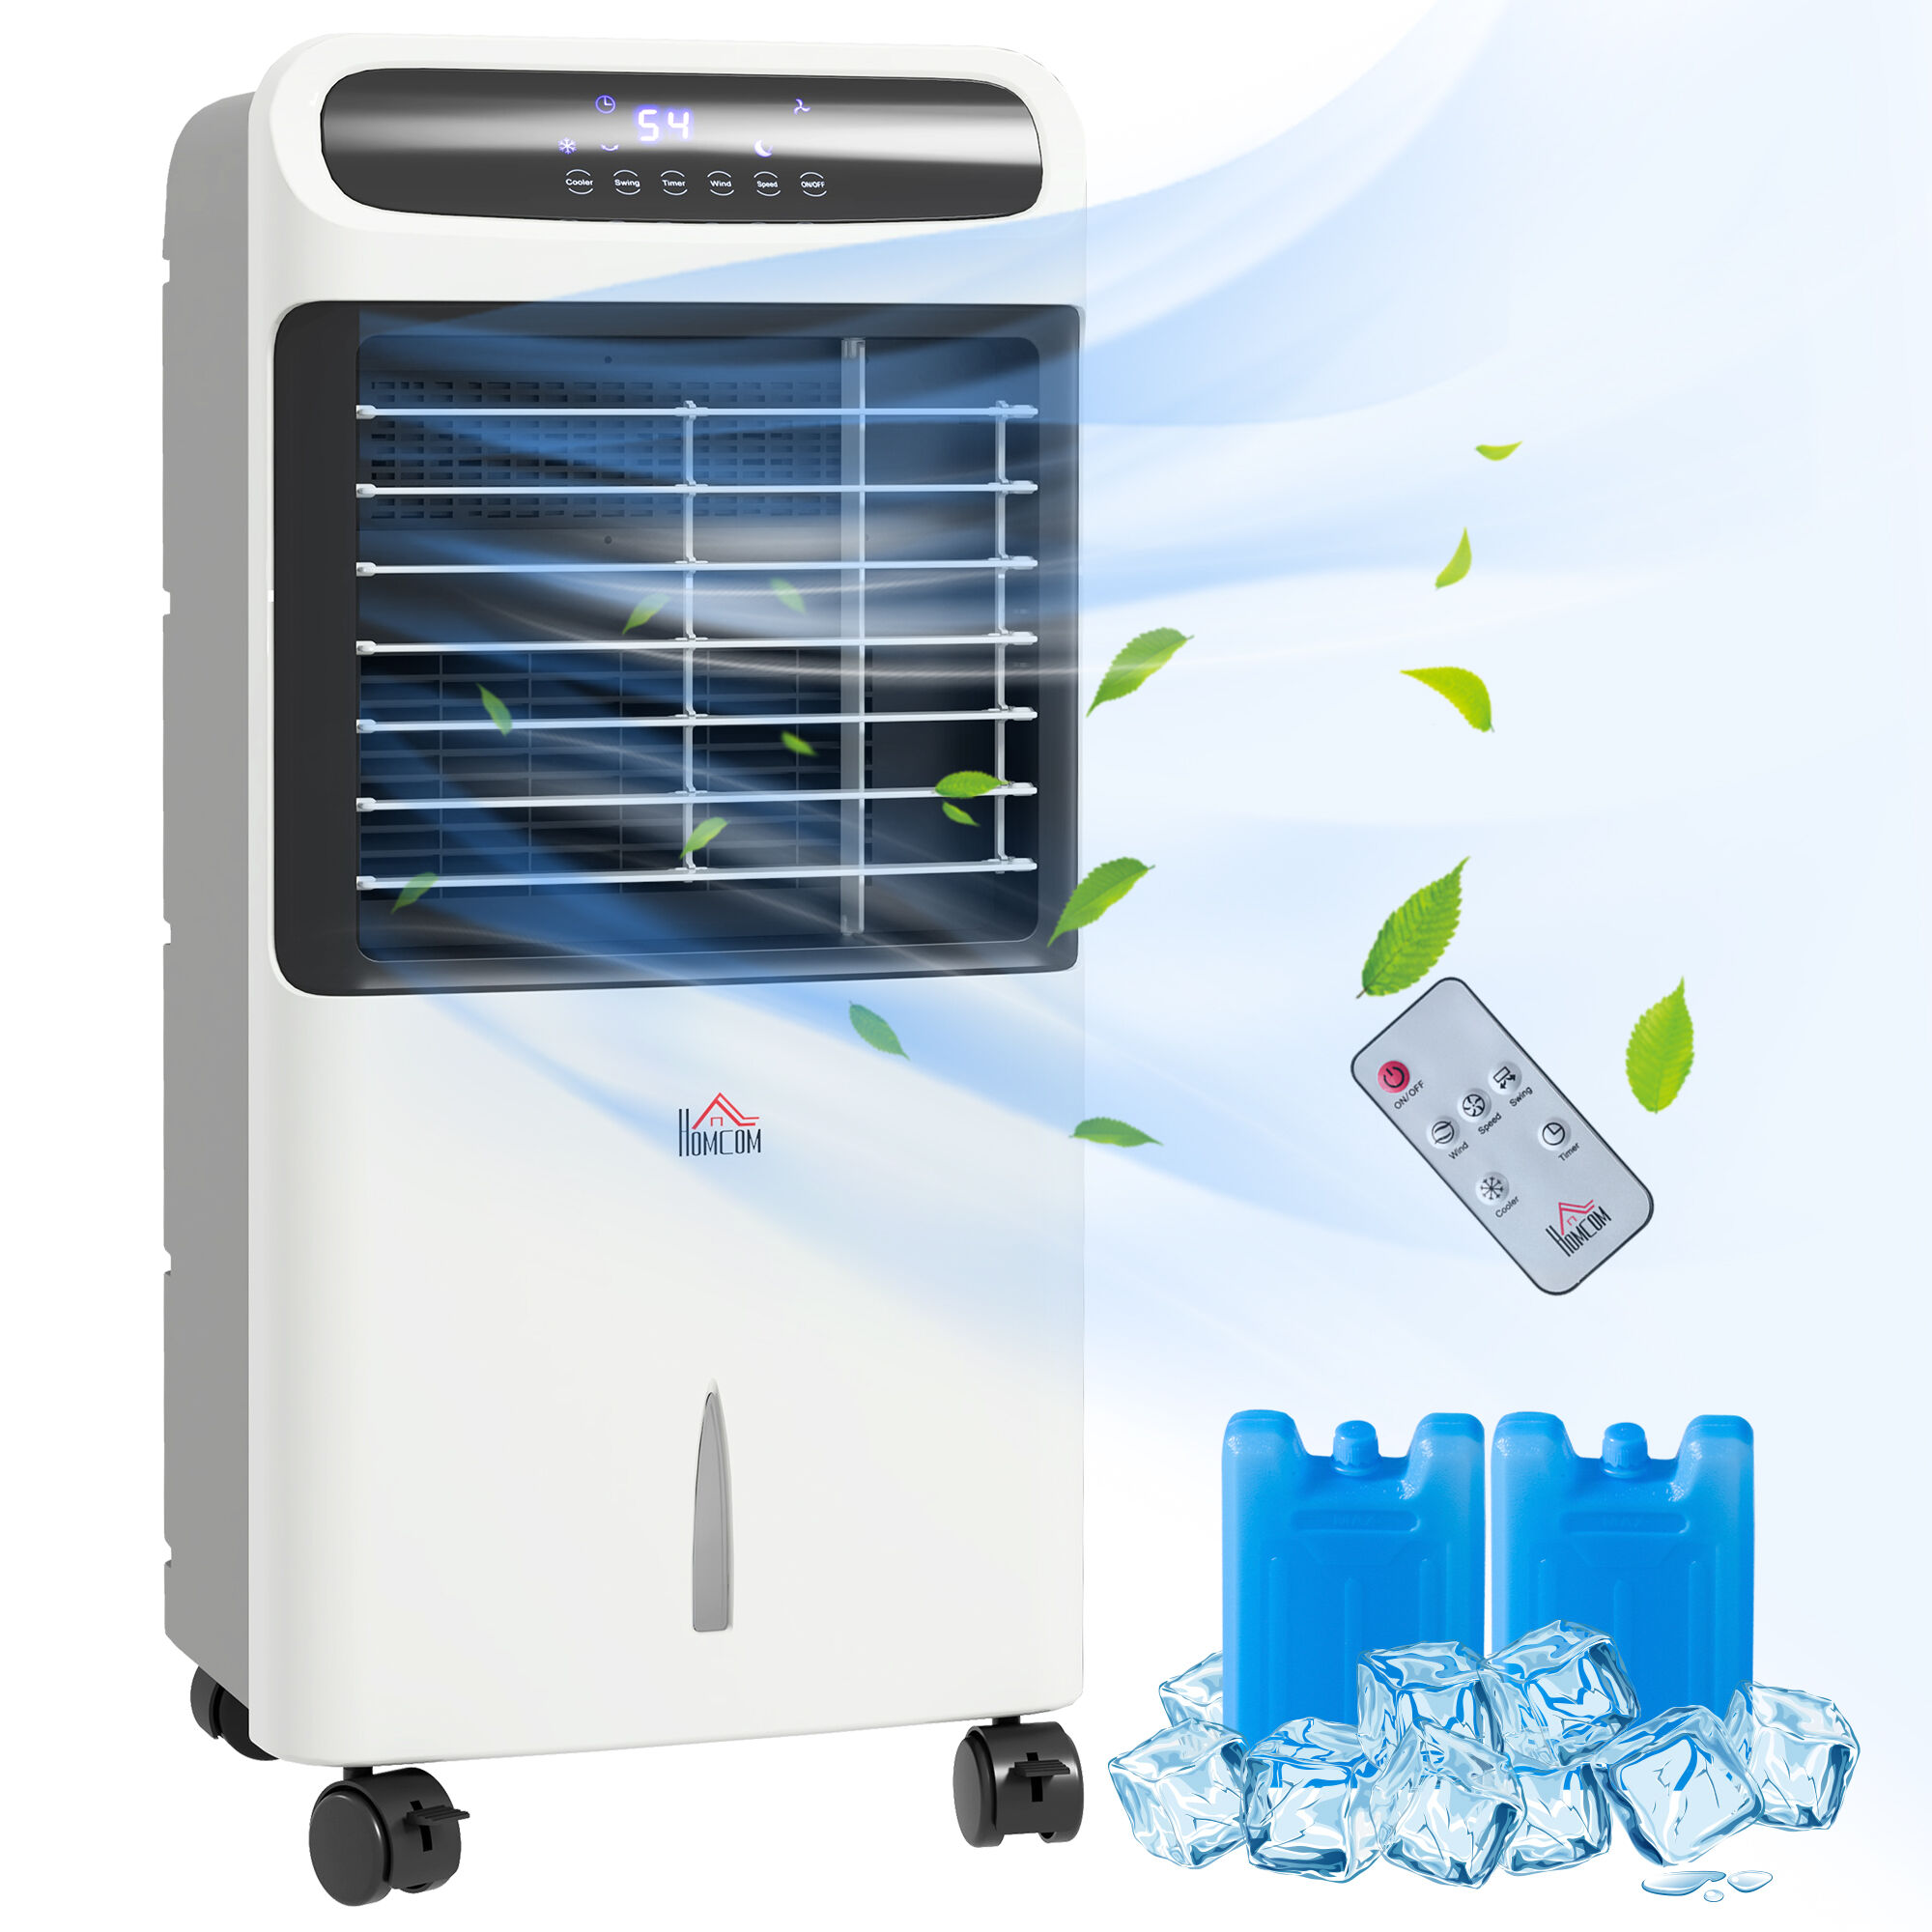 HOMCOM 32" Portable Air Cooler, 3-In-1 Evaporative Cooling, Ice Fan, Water Conditioner, Humidifier, Remote, LED   Aosom.com